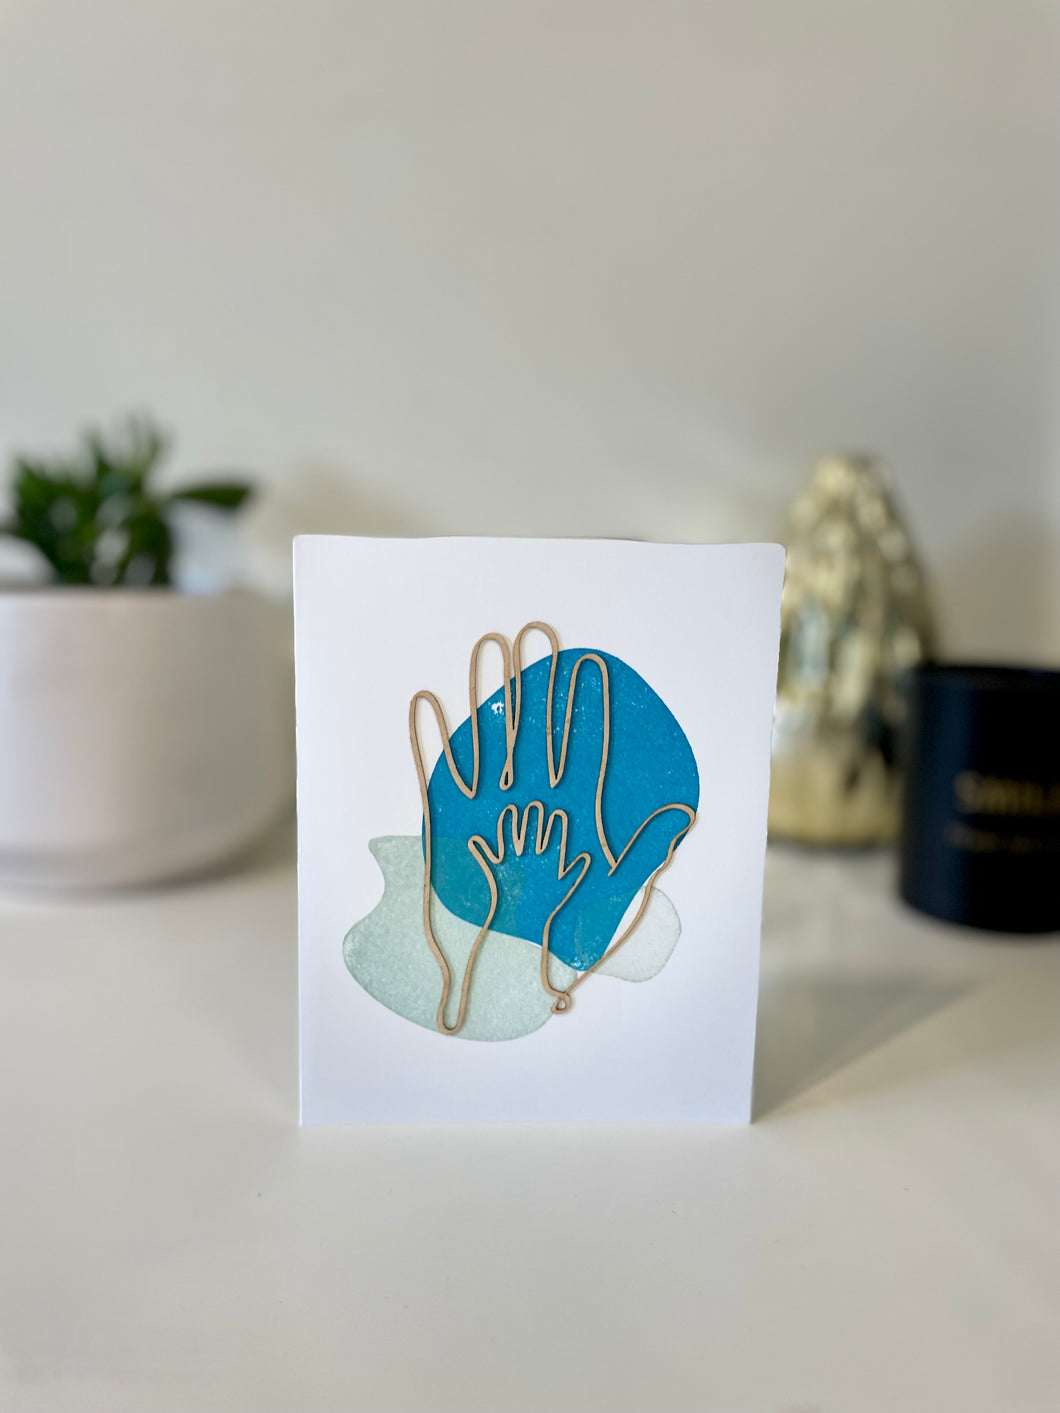 Hands greeting card with wooden design